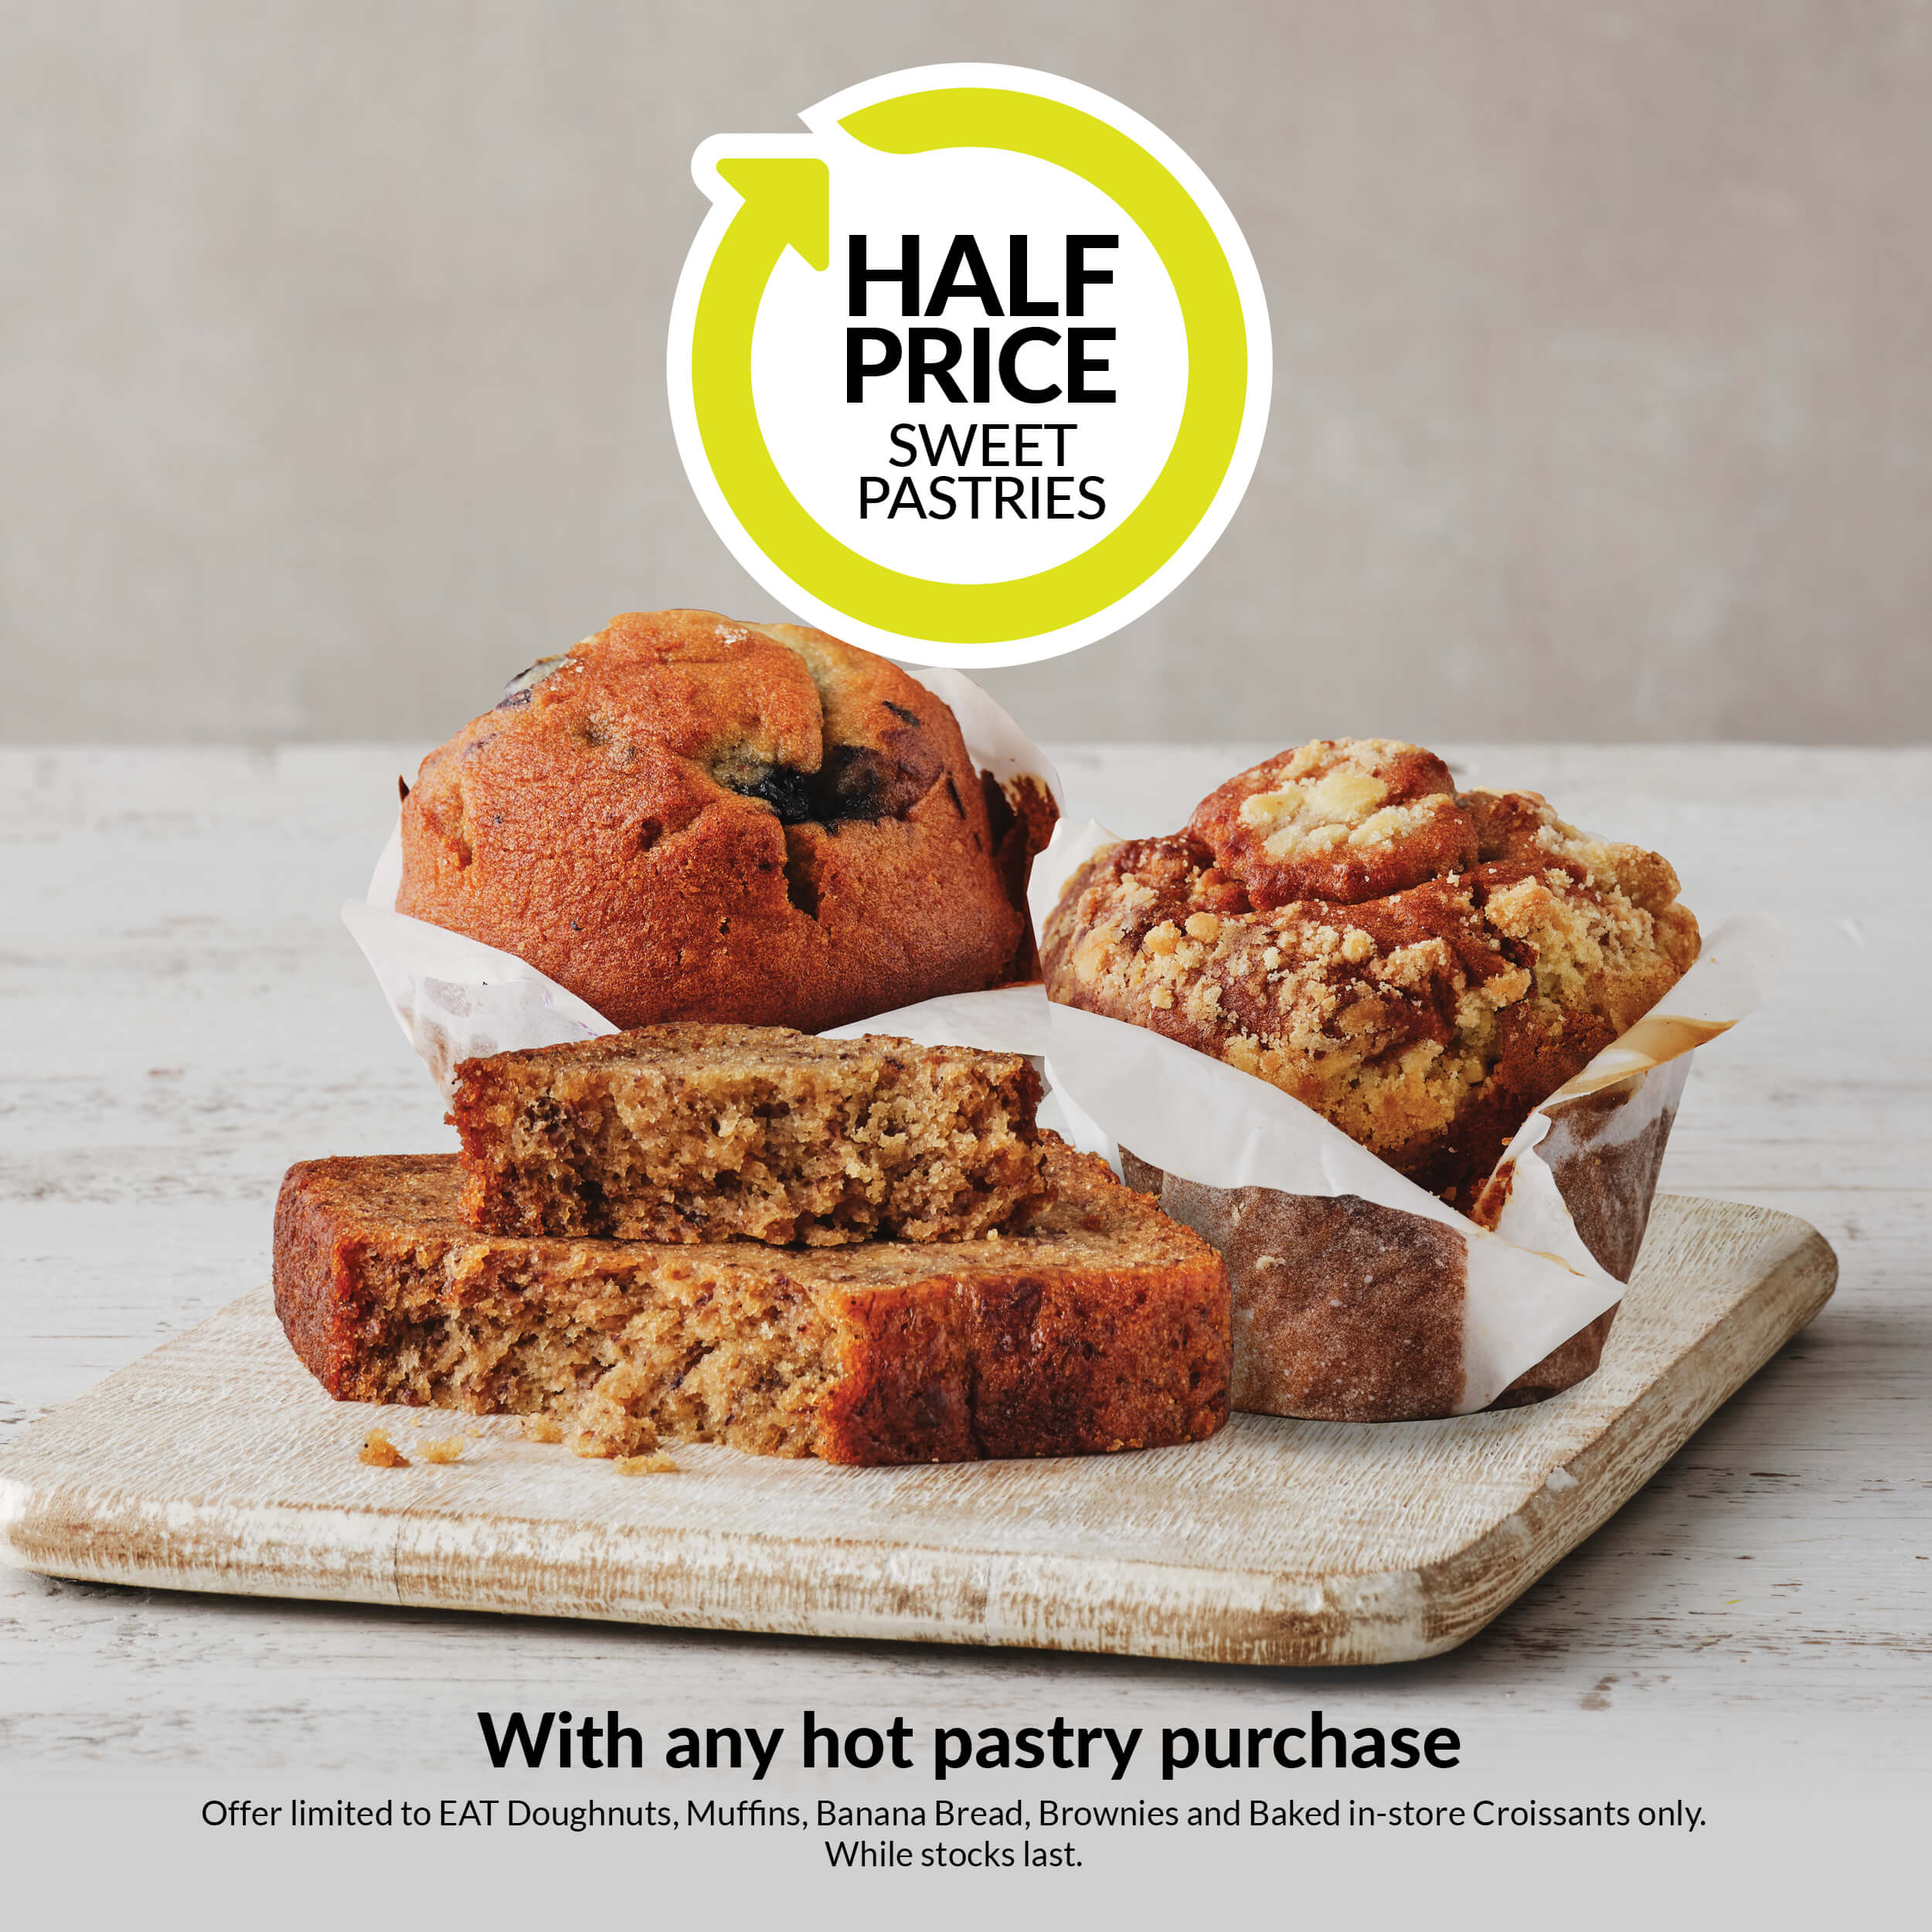 EAT - Get Sweet Pastry Half Price with any Hot Pastry, Ends June 25